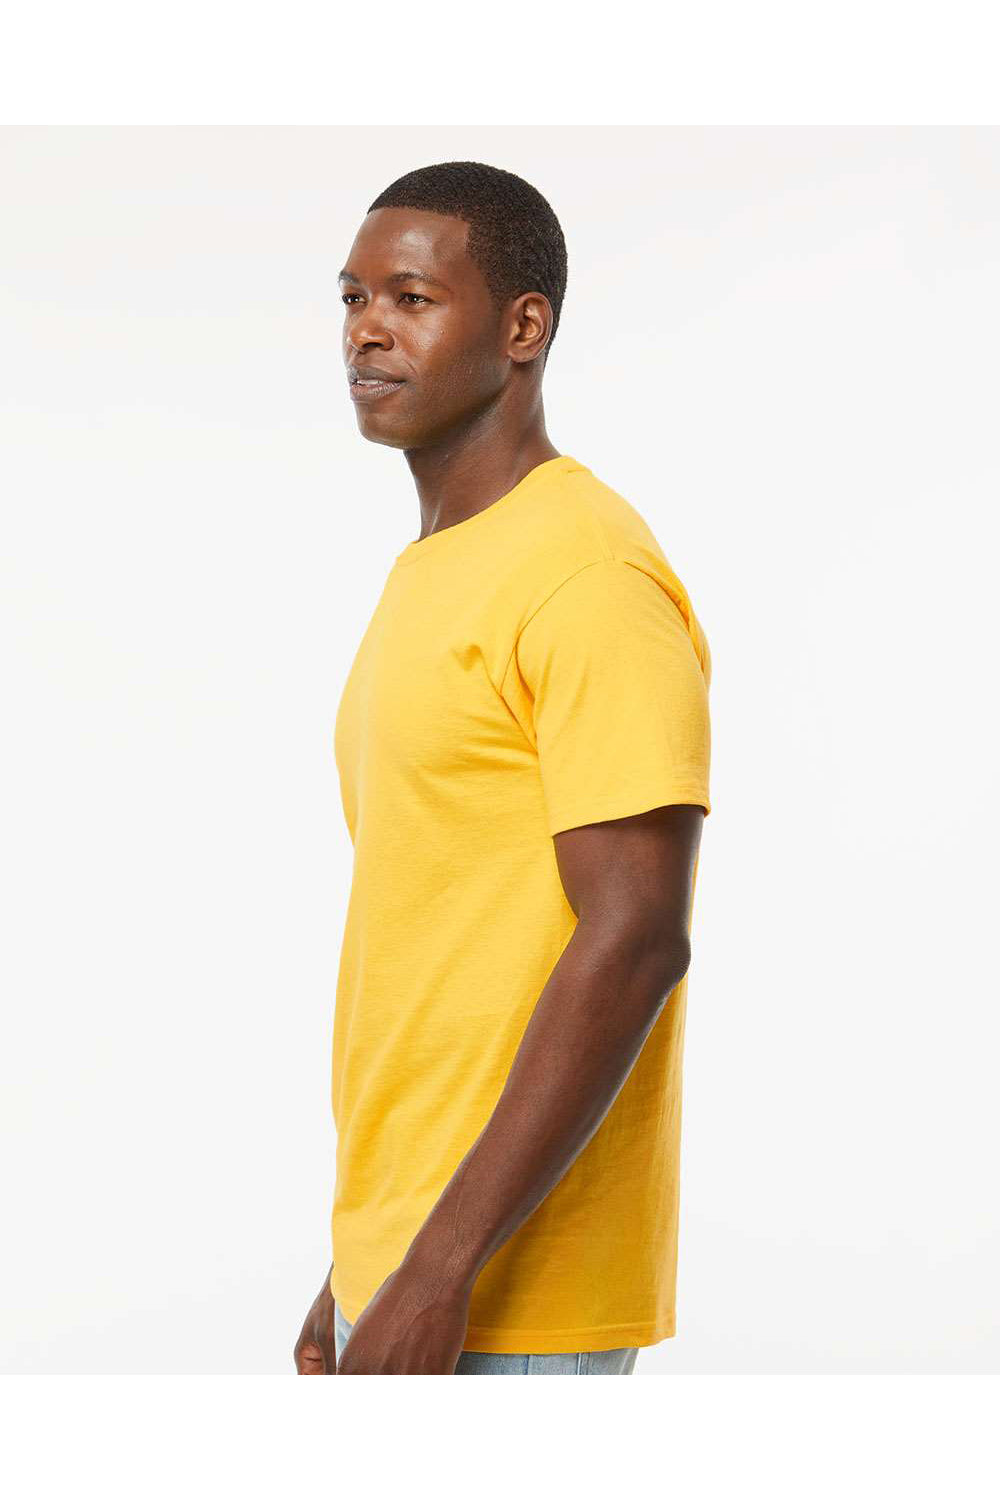 M&O 4800 Mens Gold Soft Touch Short Sleeve Crewneck T-Shirt Yellow Model Side